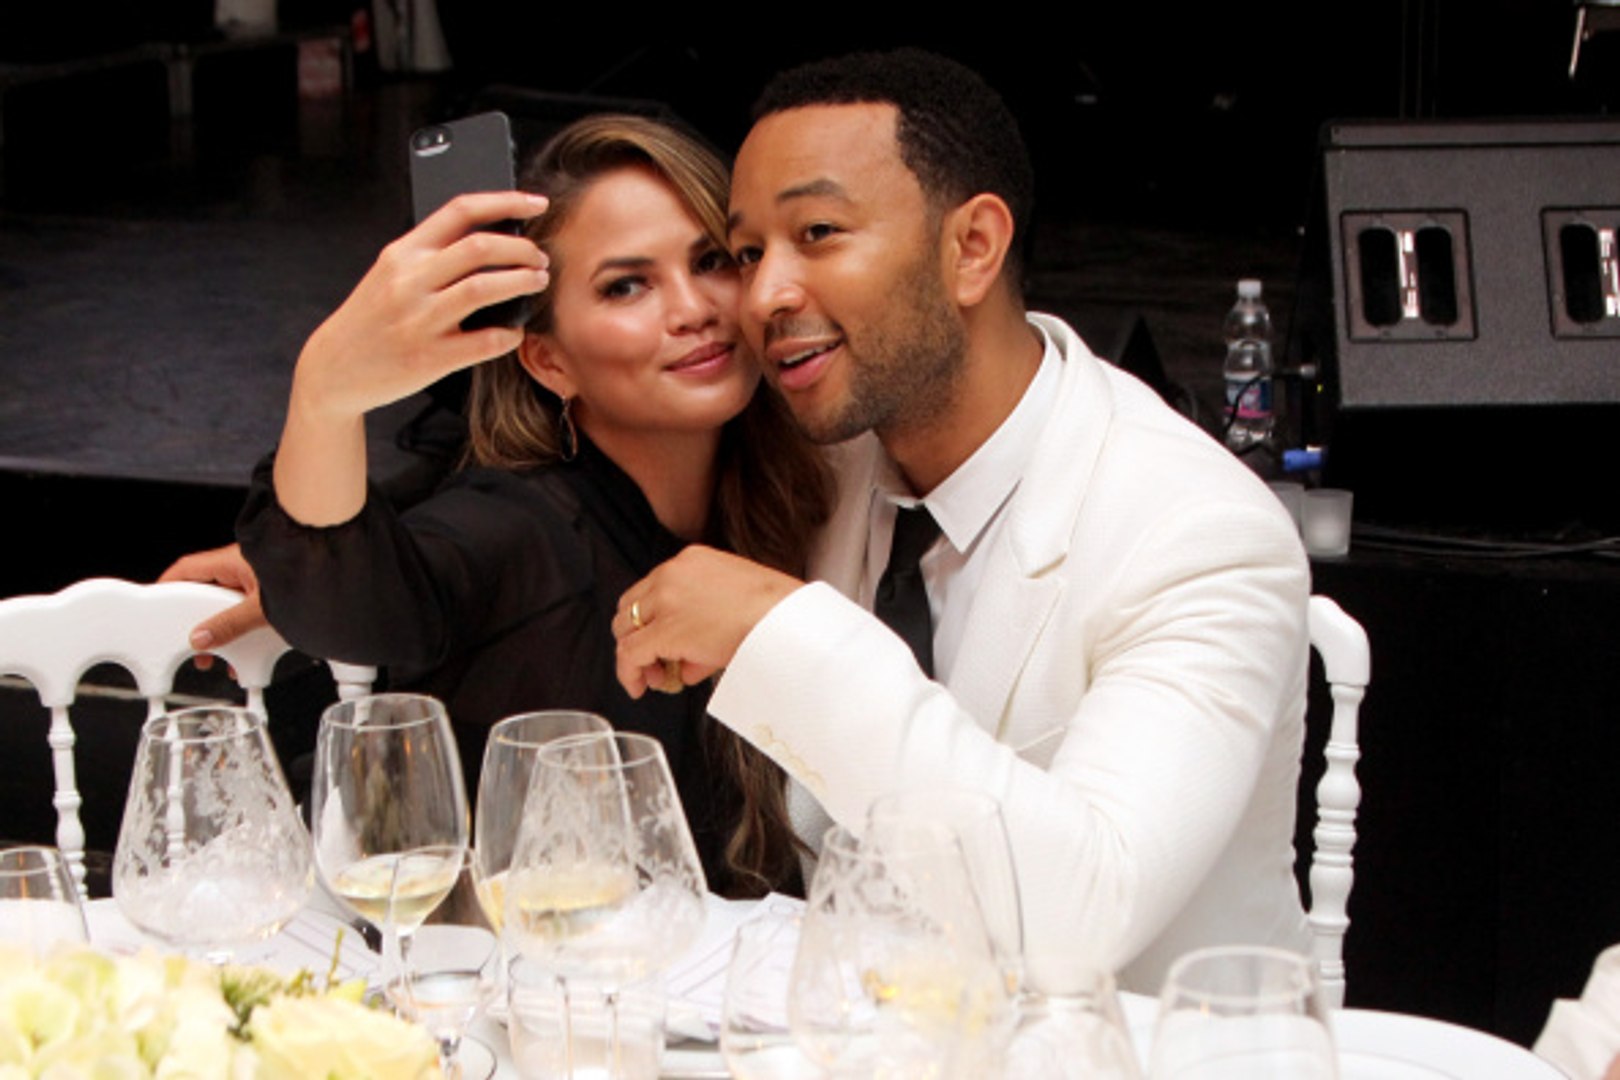 Chrissy Teigen's response to John Legend trying to break up with her is amazing